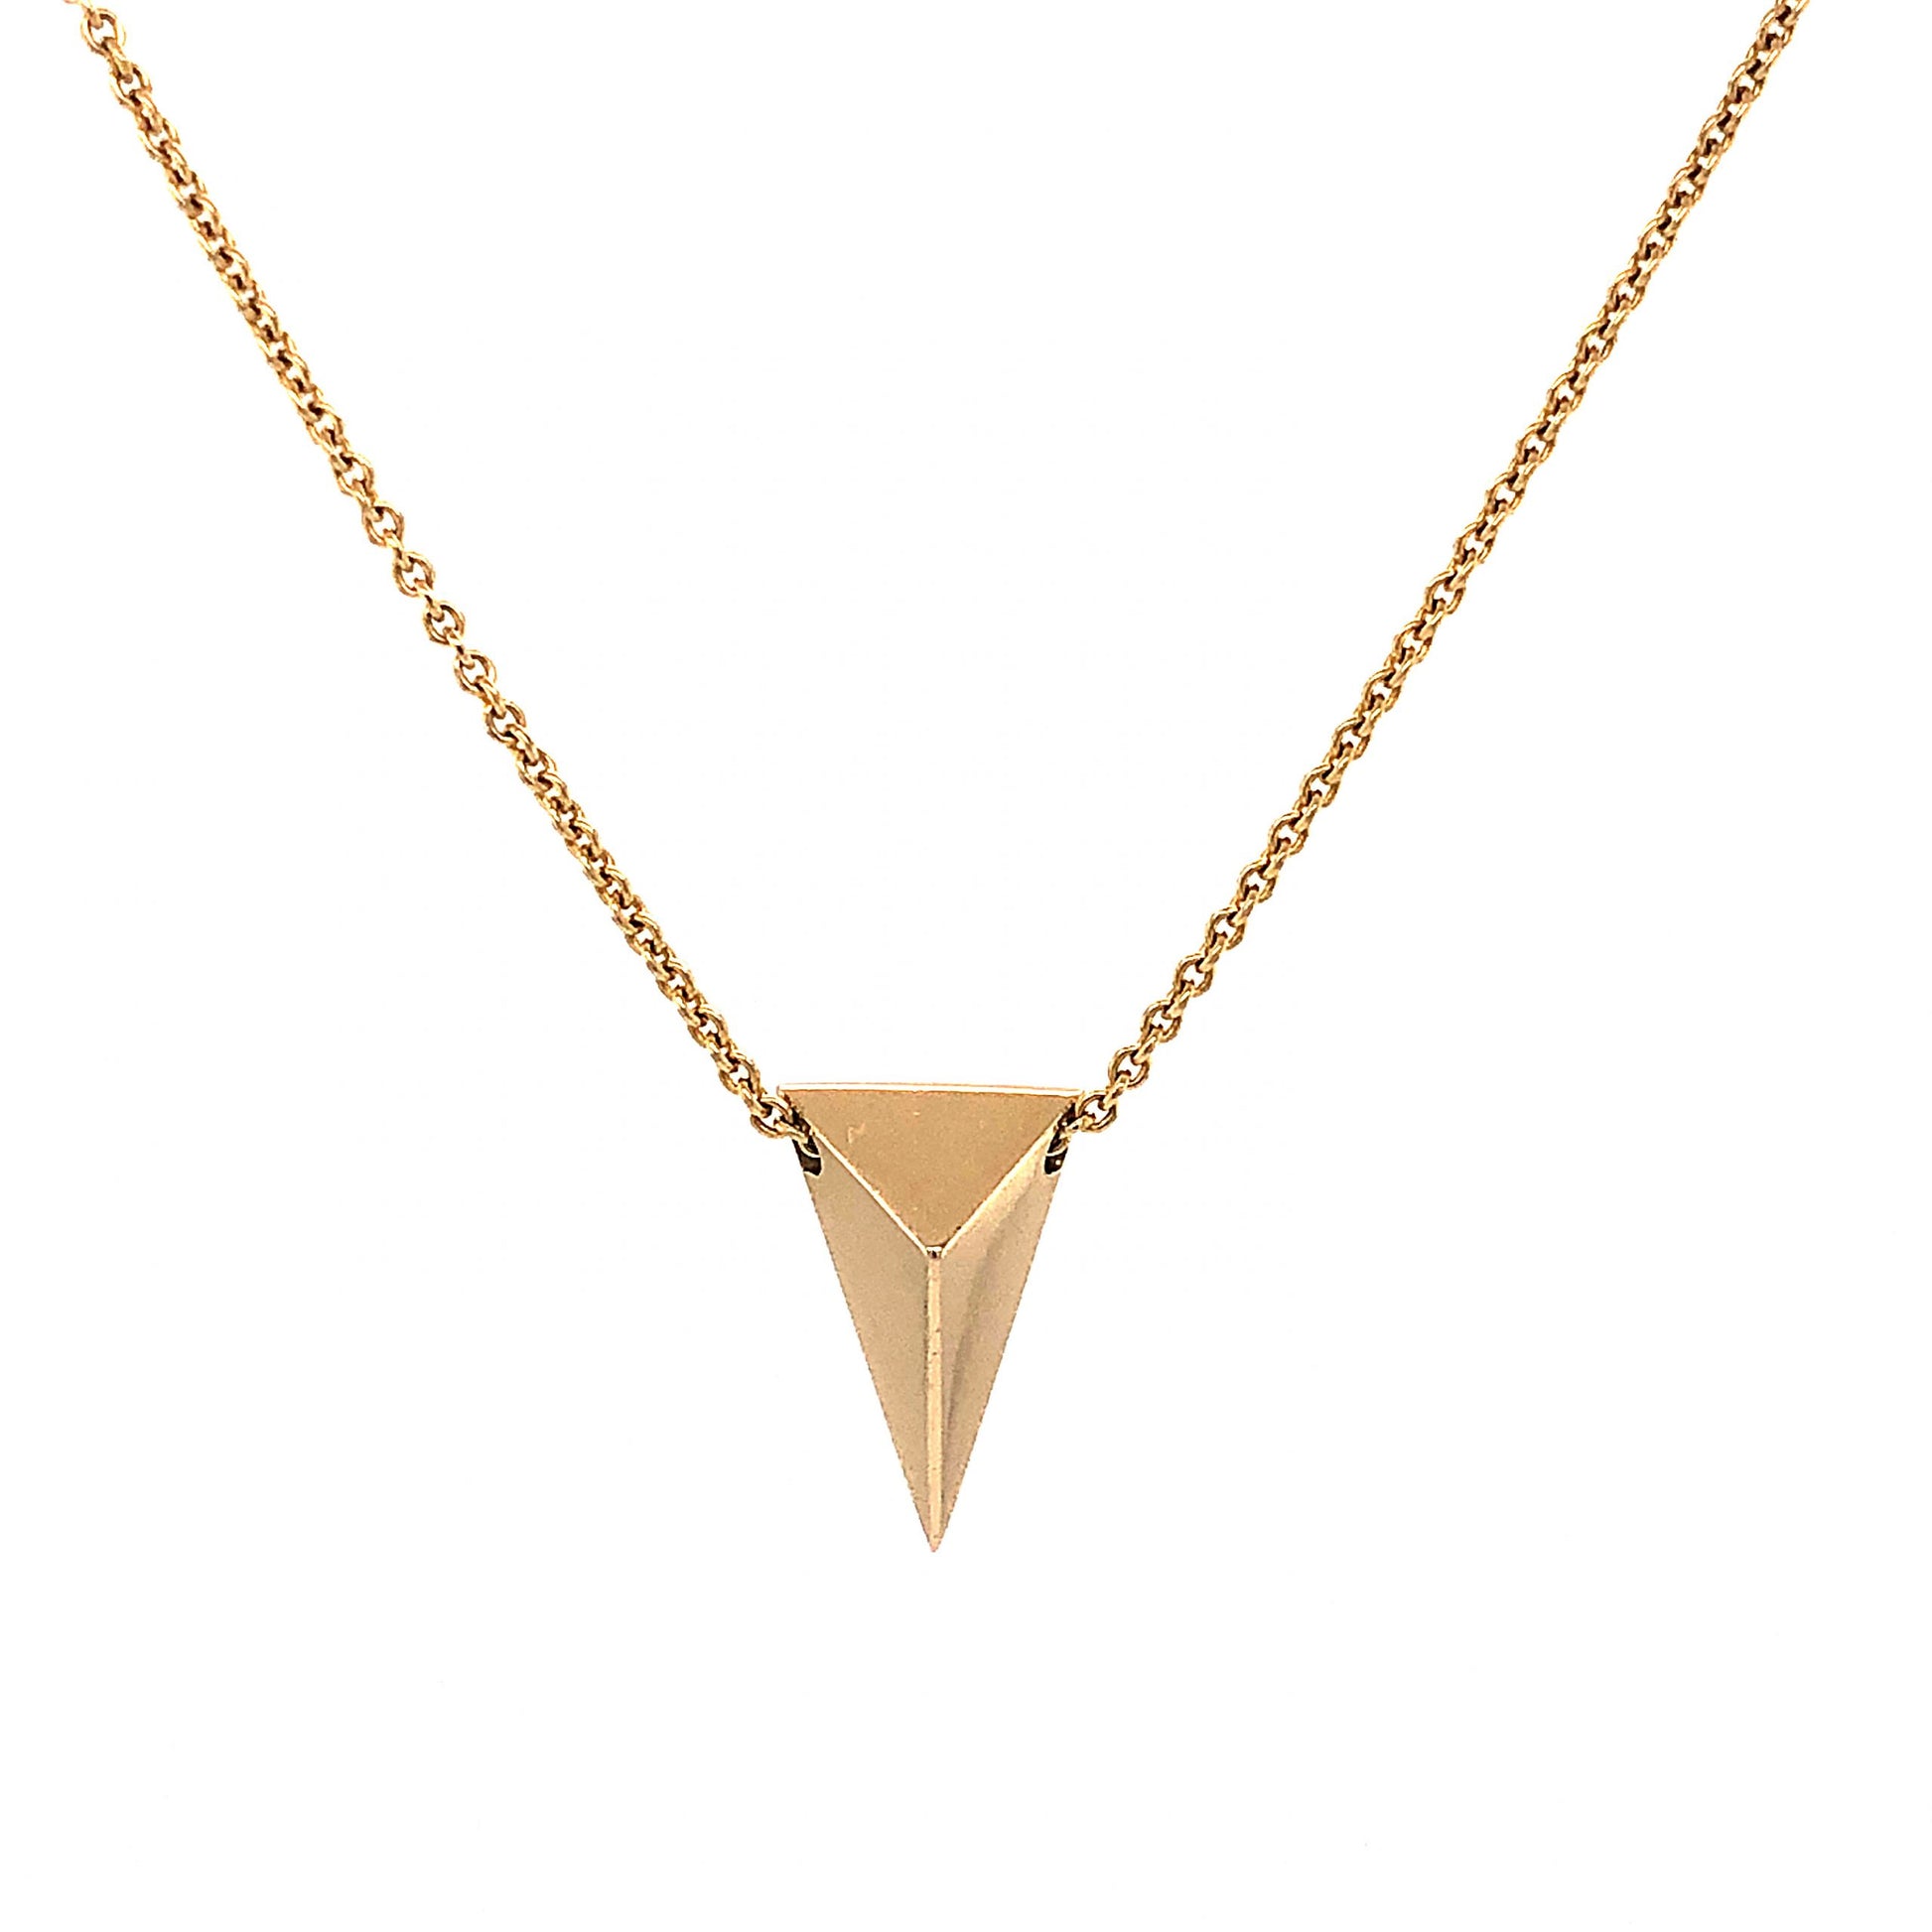 18 Inch Triangular Pendant Necklace in 14k Yellow GoldComposition: 14 Karat Yellow Gold Total Gram Weight: 4.0 g Inscription: 14k
      